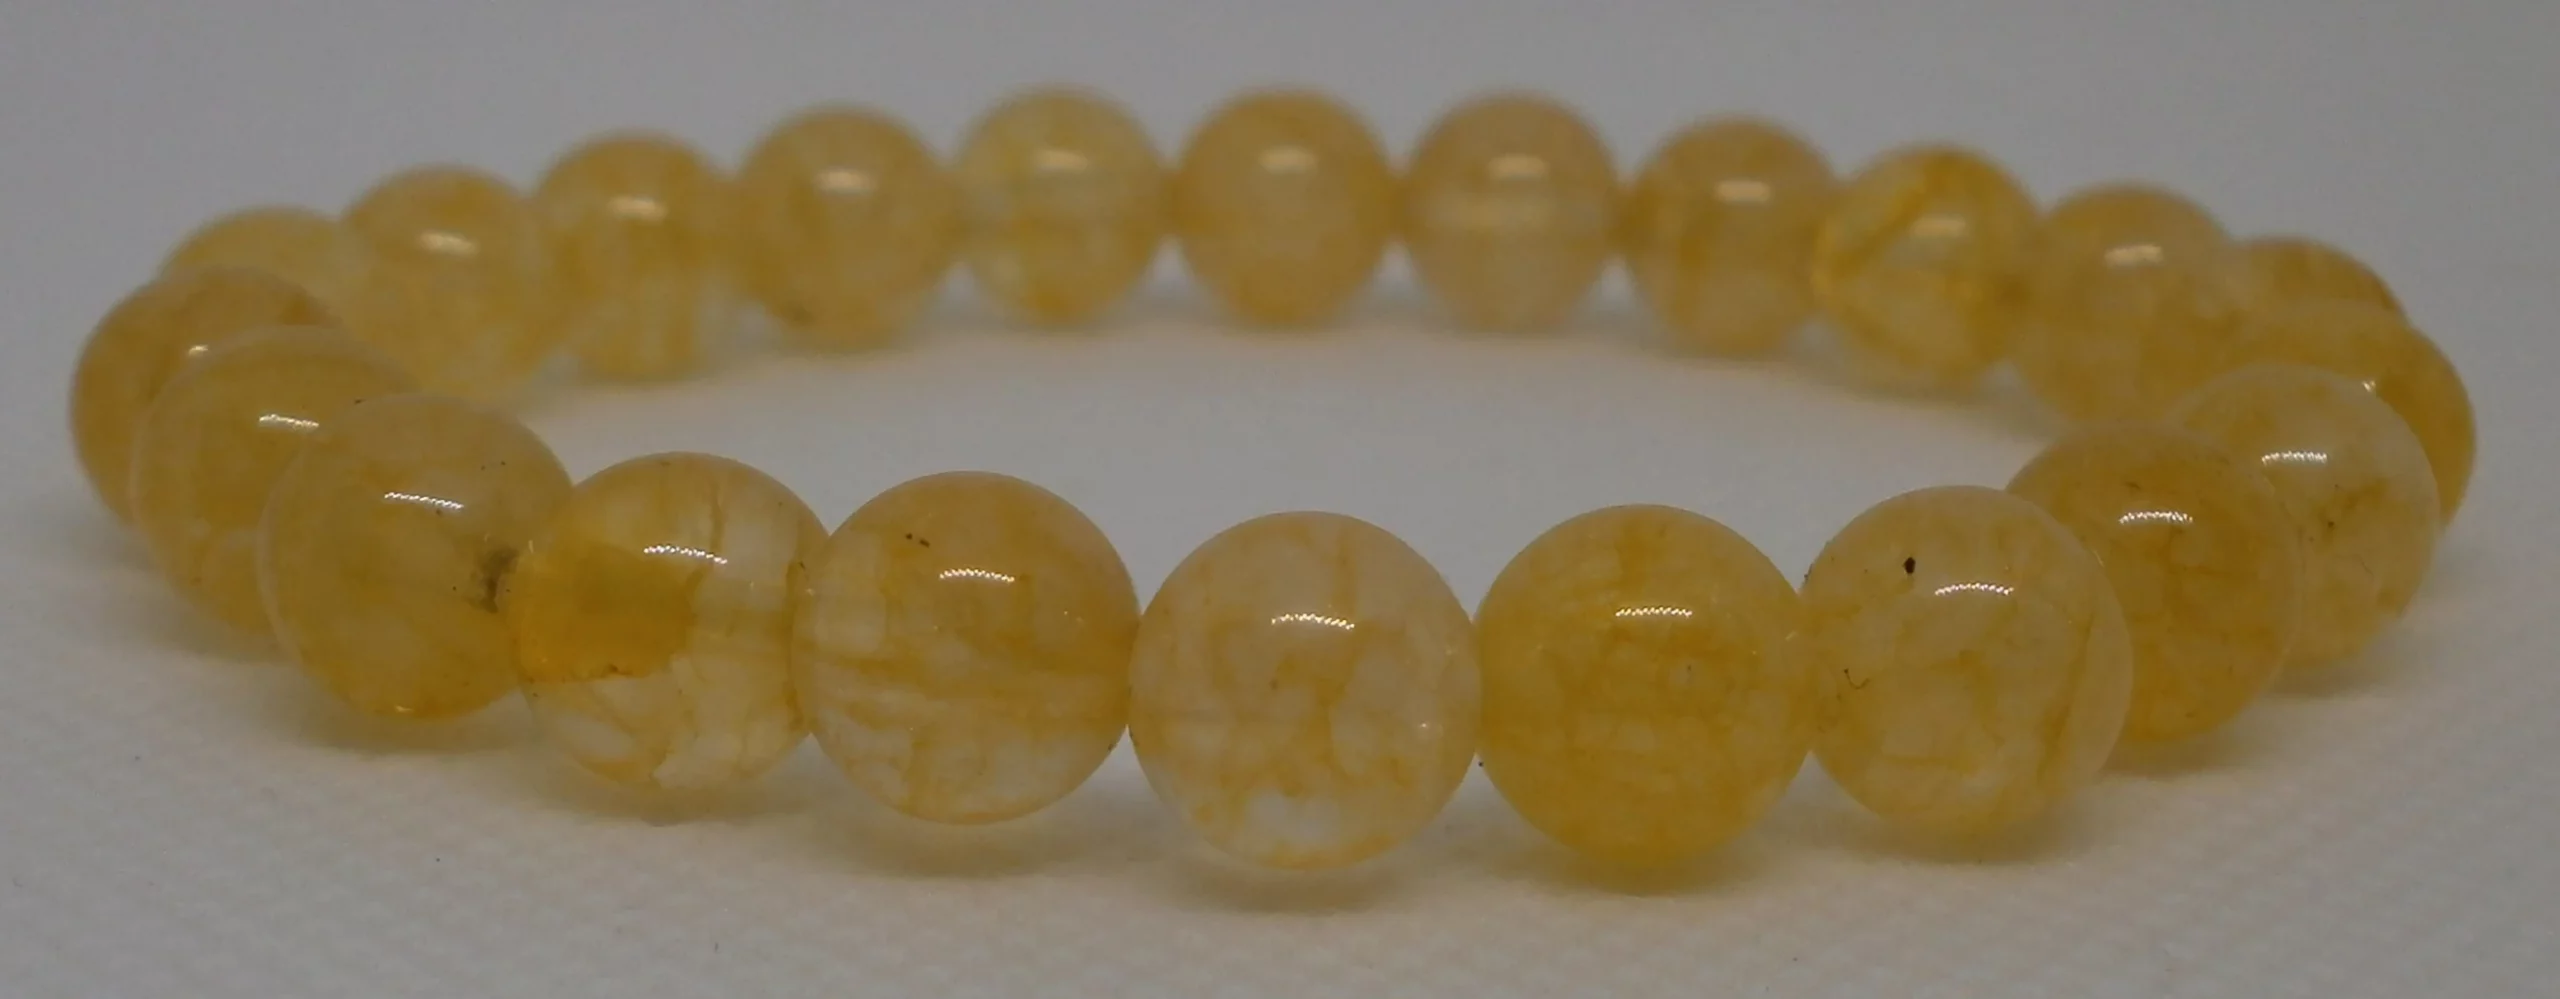 Yellow Citrine Faceted Bead Bracelet - To manifest goals and attracts  abundance - Engineered to Heal²